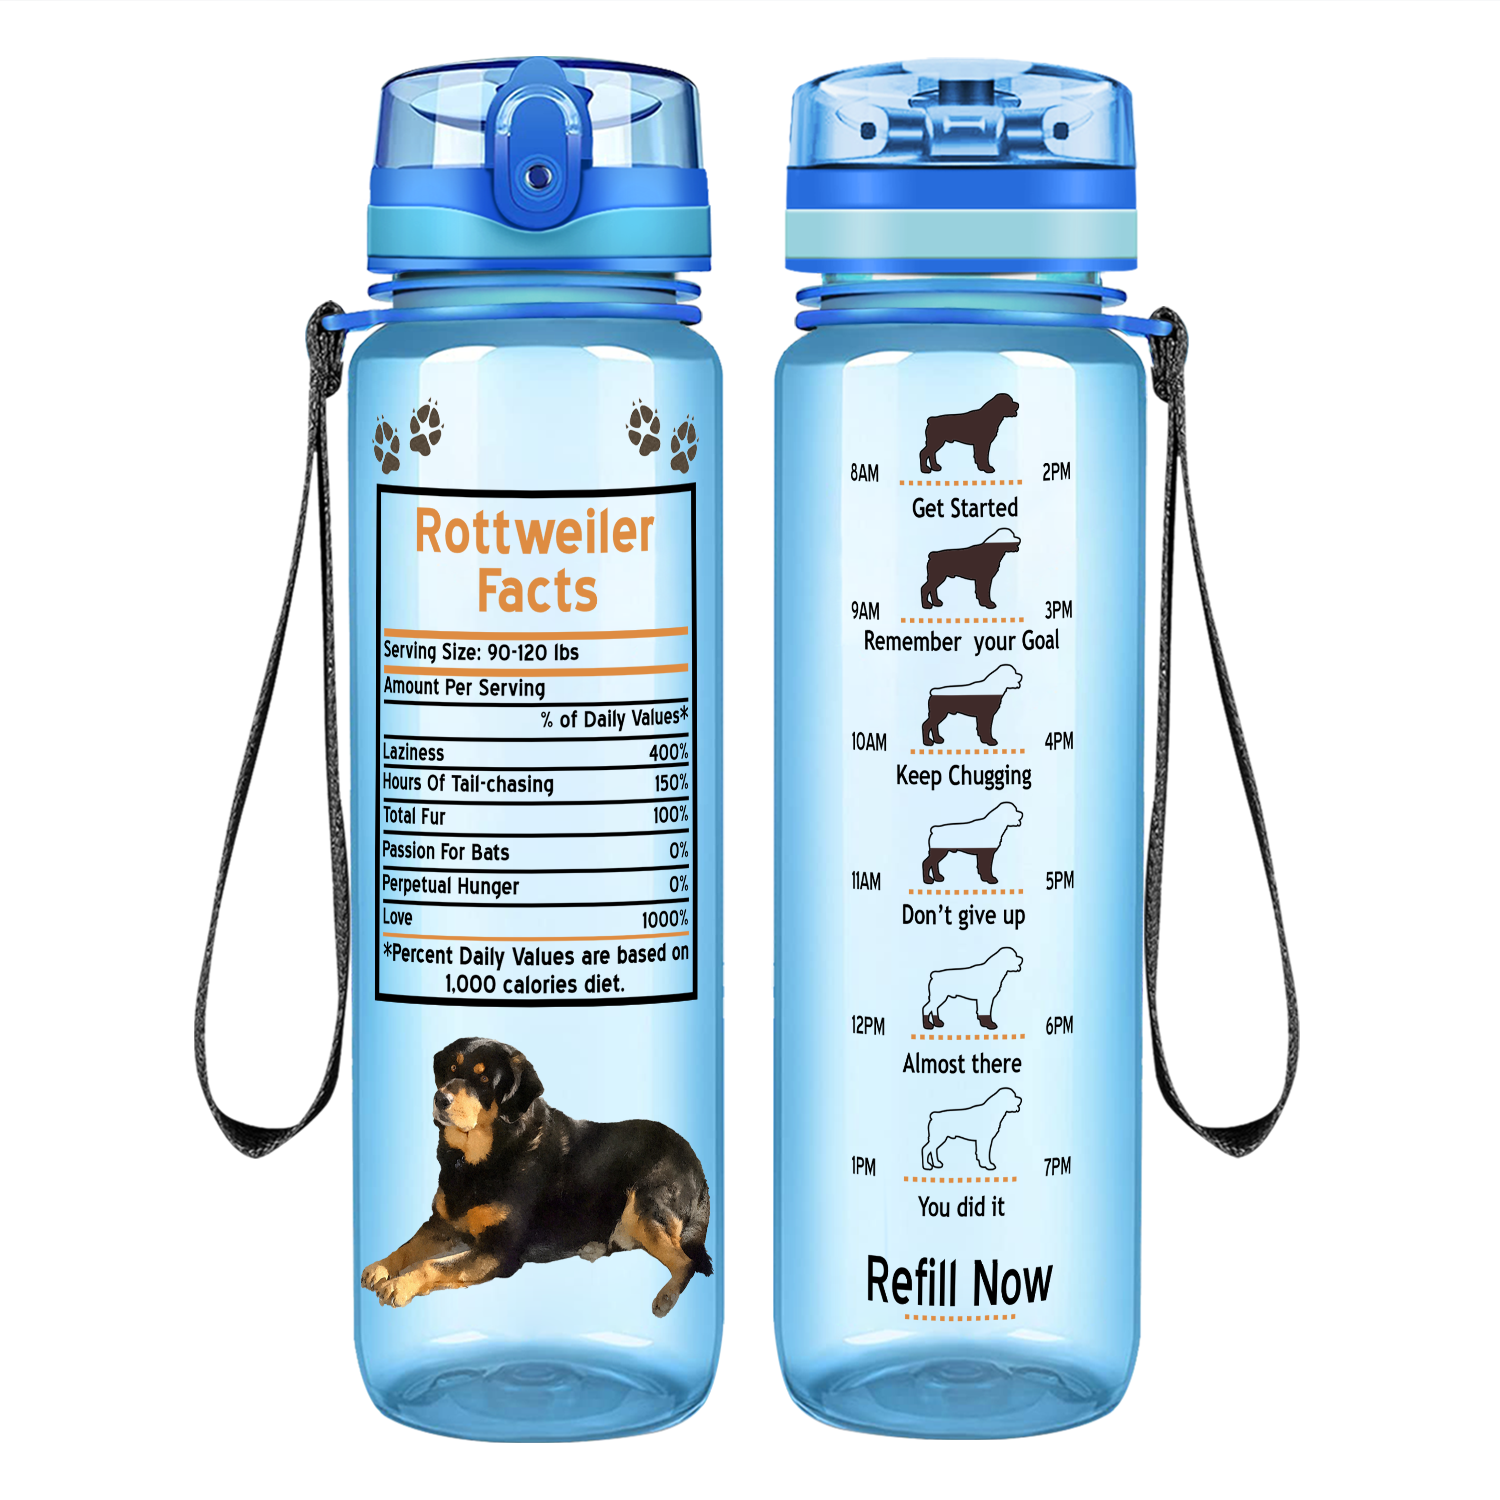 Rottweiler Facts on 32 oz Motivational Tracking Water Bottle